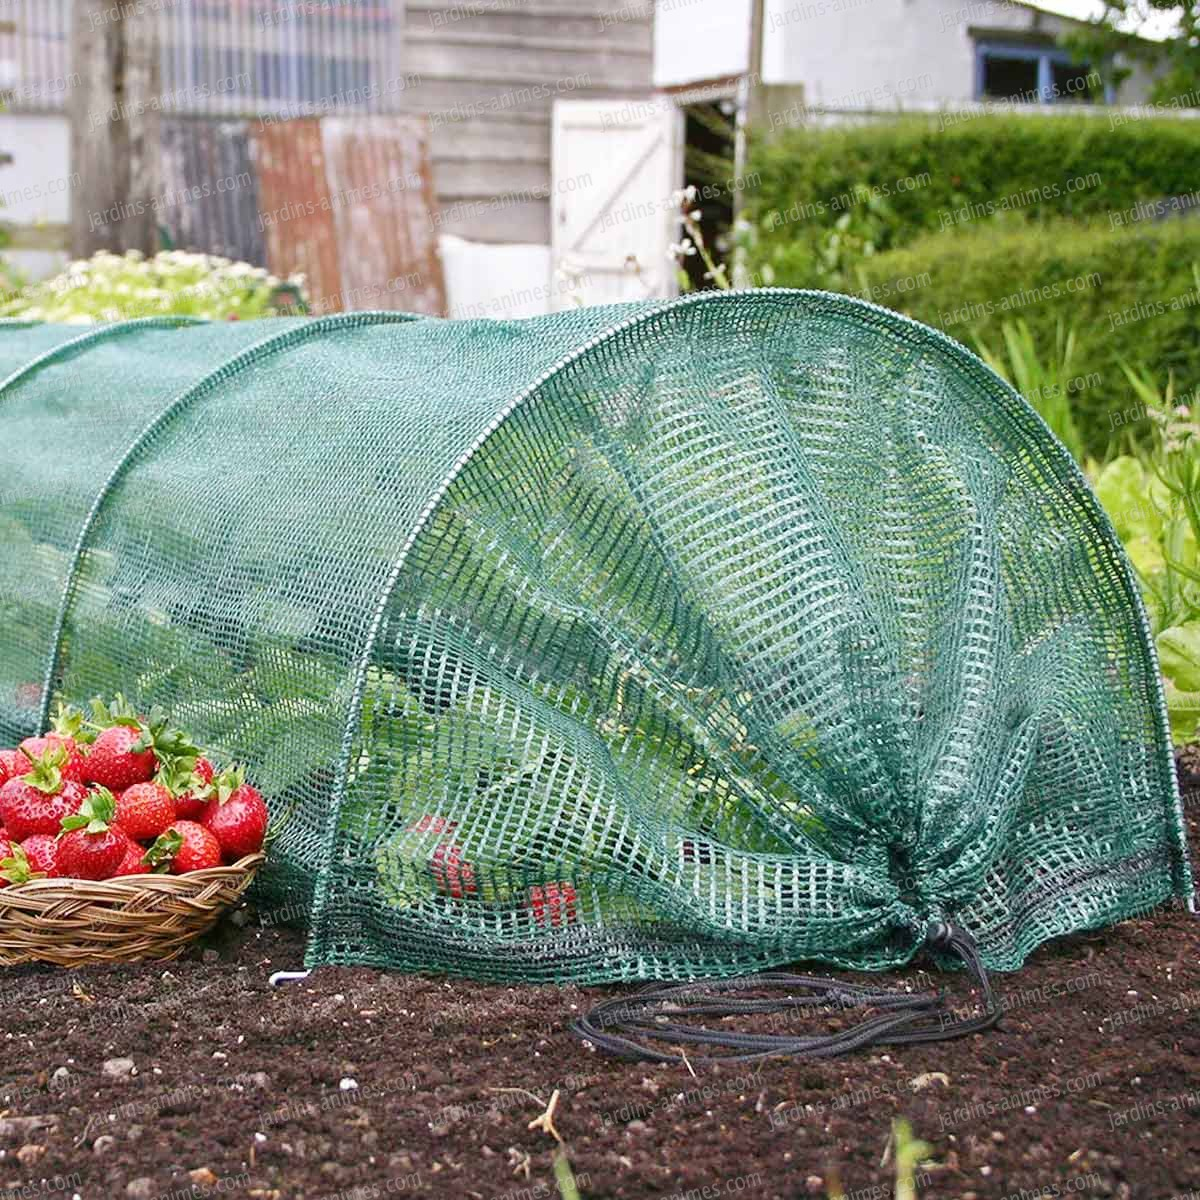 Tunnel Ombrage Anti Insecte avec Tunnel Pour Jardin